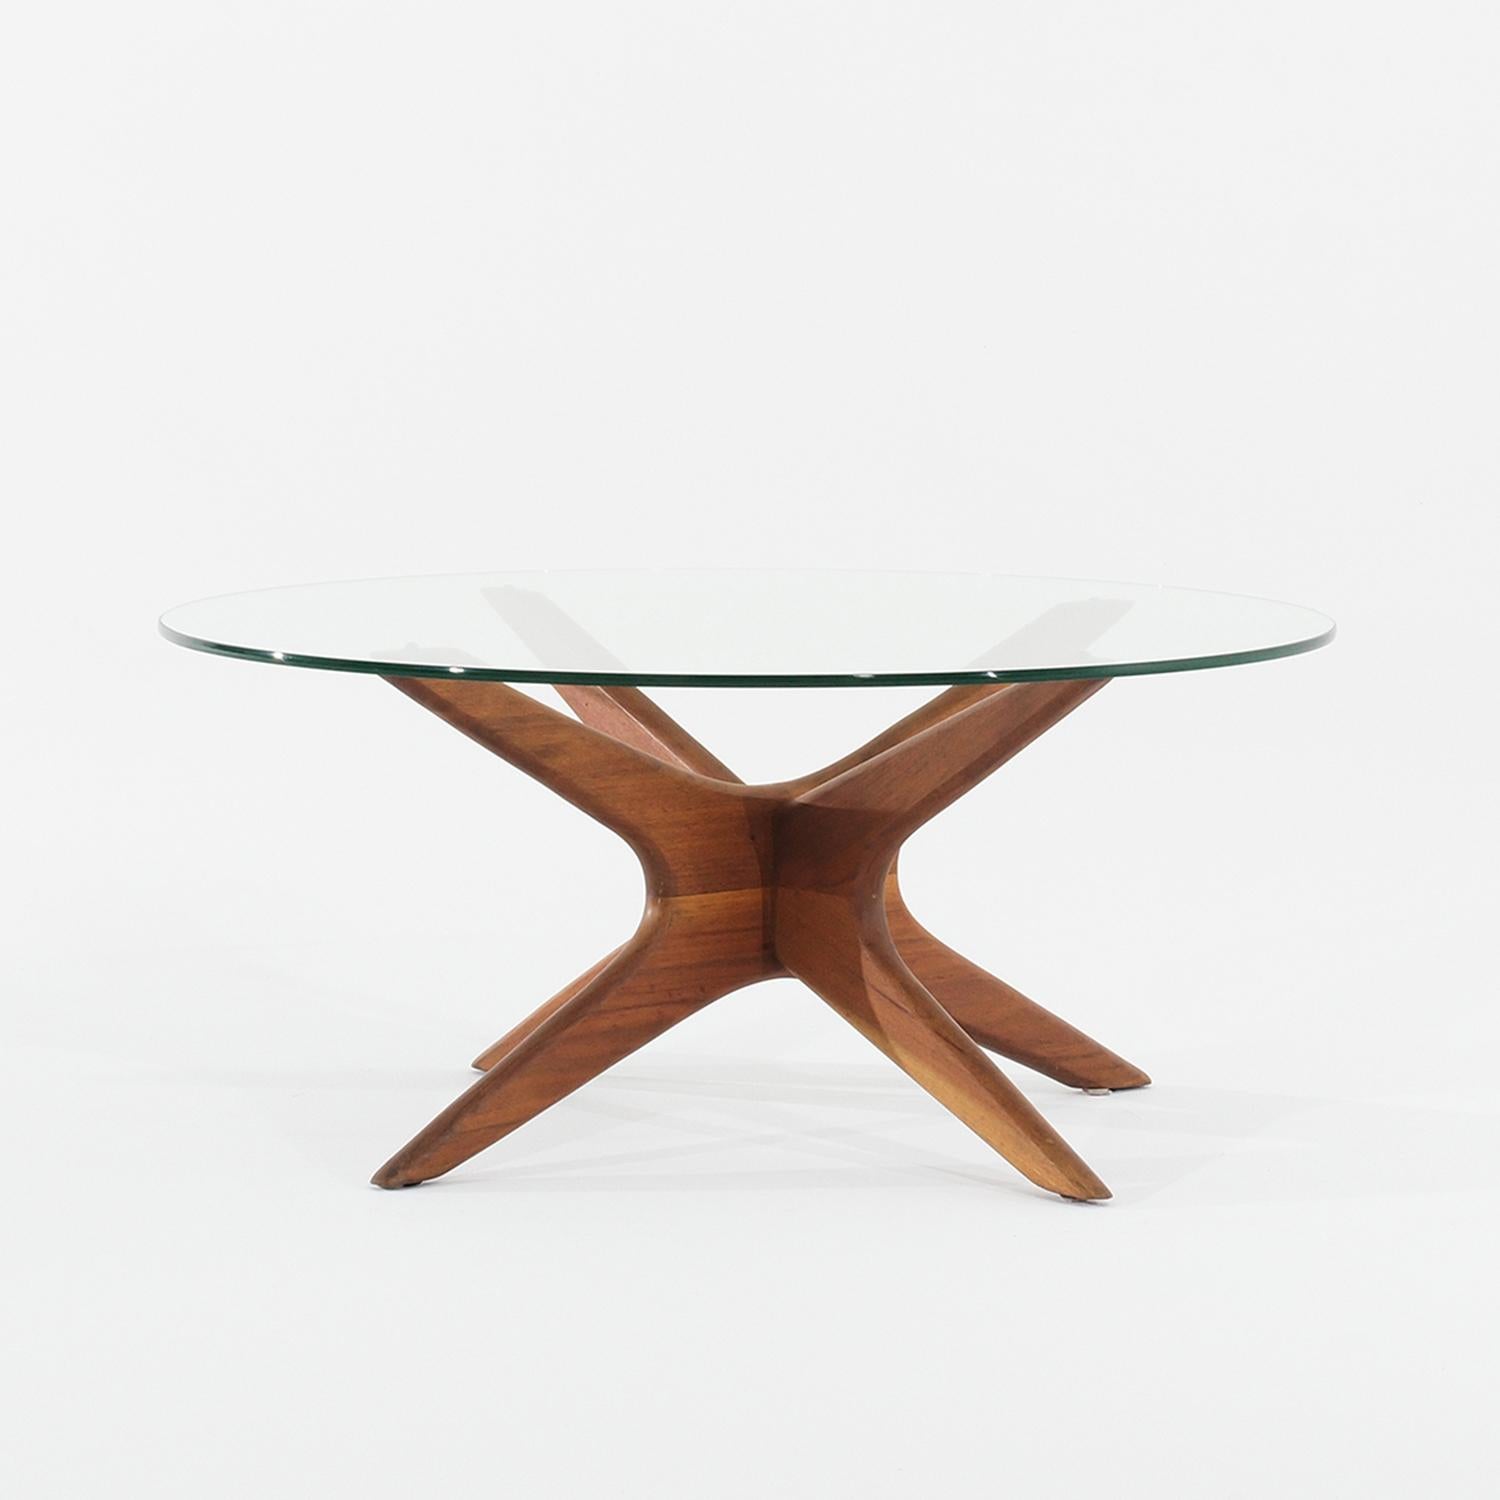 A round, vintage Mid-Century modern American coffee, sofa table made of hand crafted polished Walnut, designed by Adrian Pearsall and produced by Craft Associates in good condition. The original slightly smoked glass top is supported by four